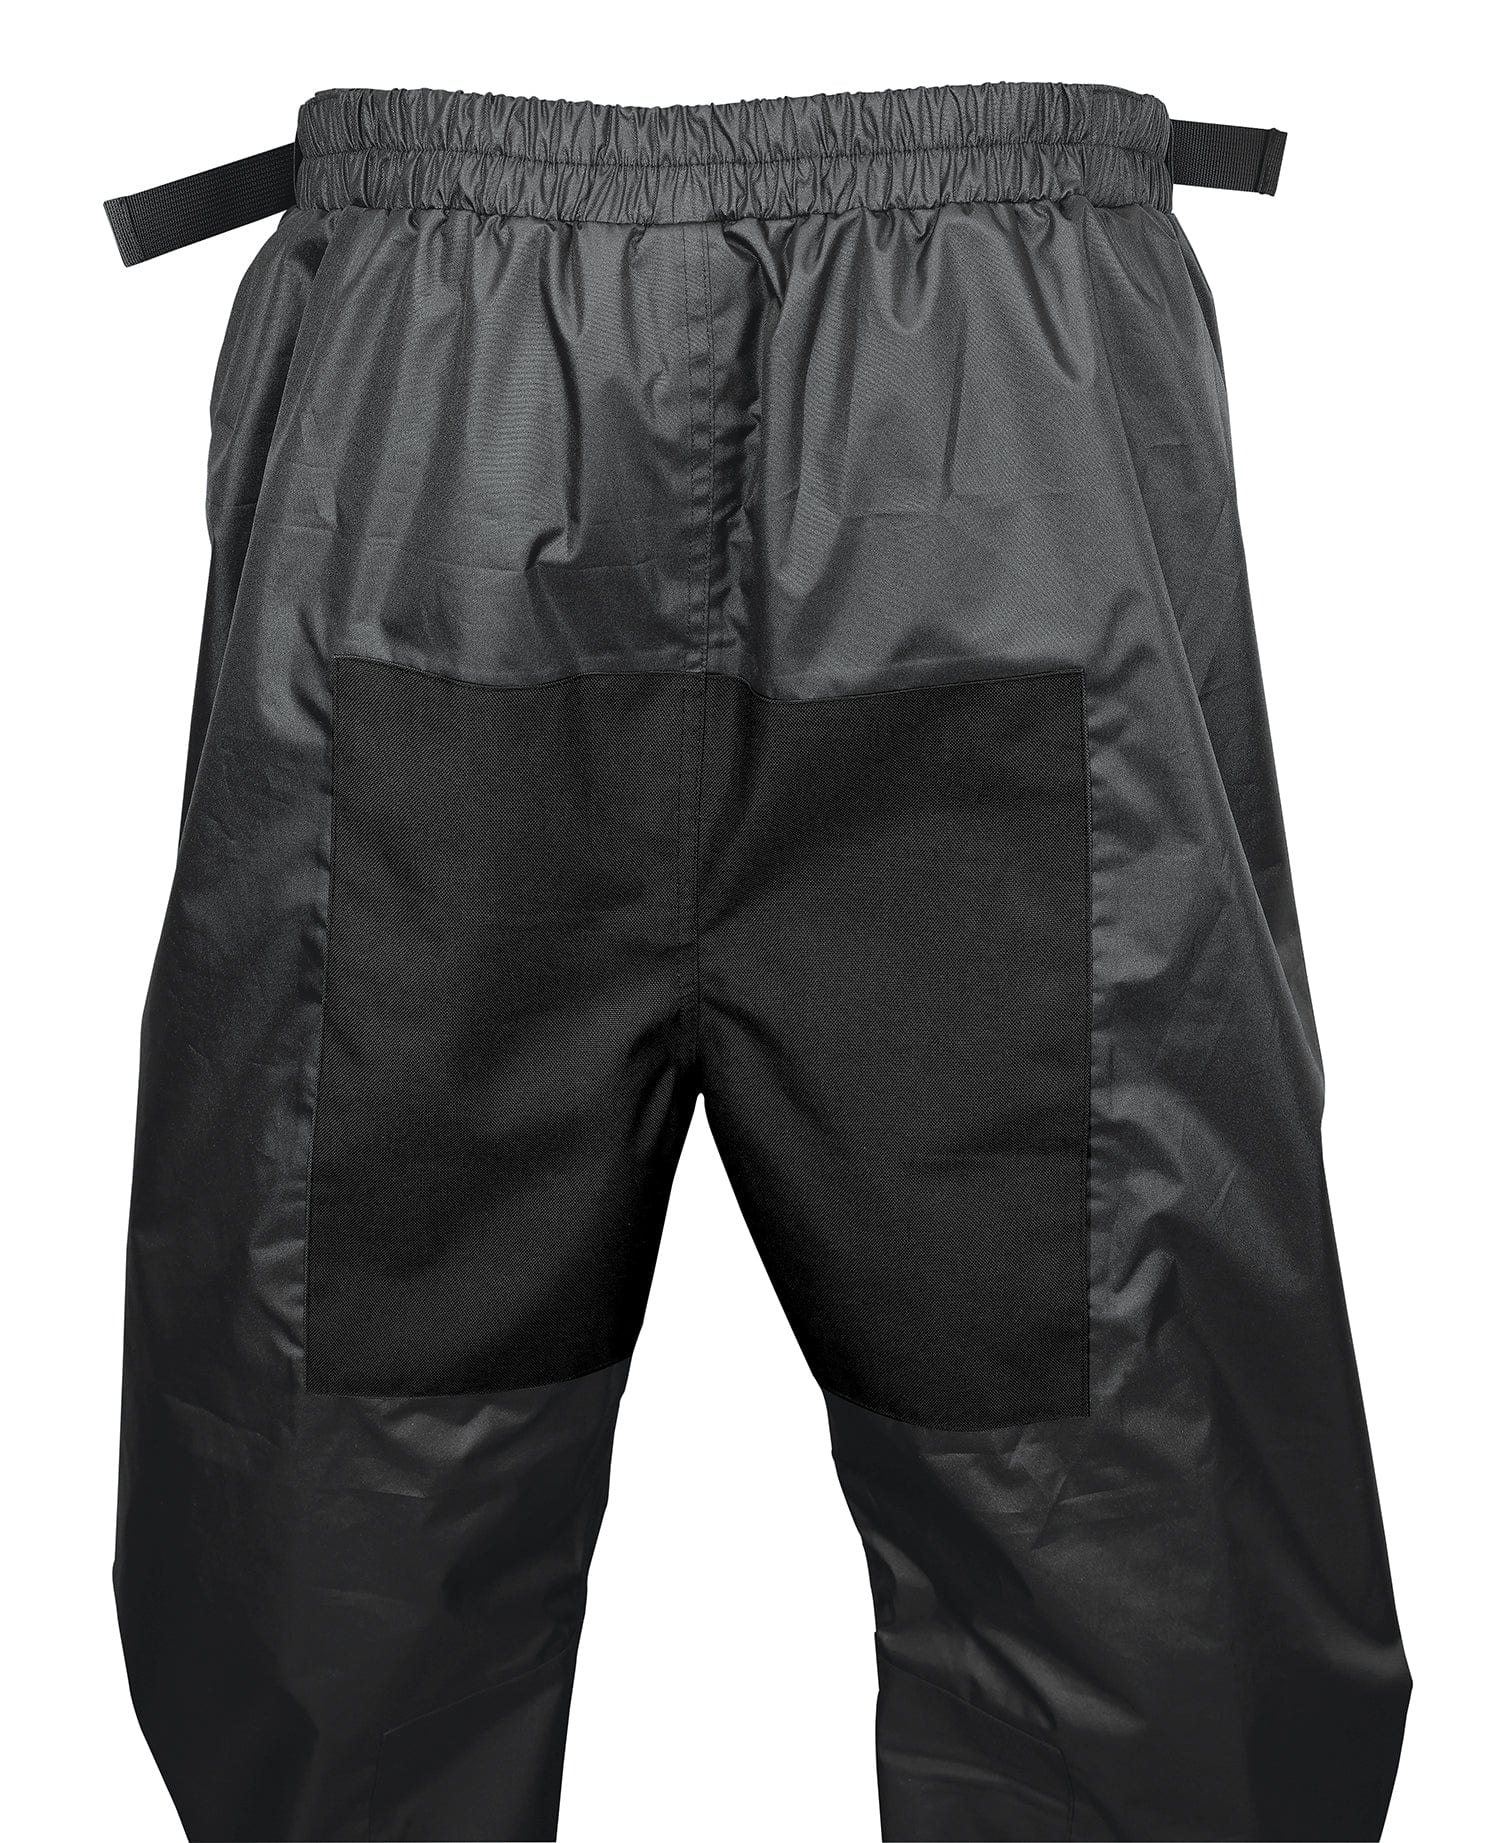 Western Powersports Pants Solo Storm Pants By Nelson-Rigg